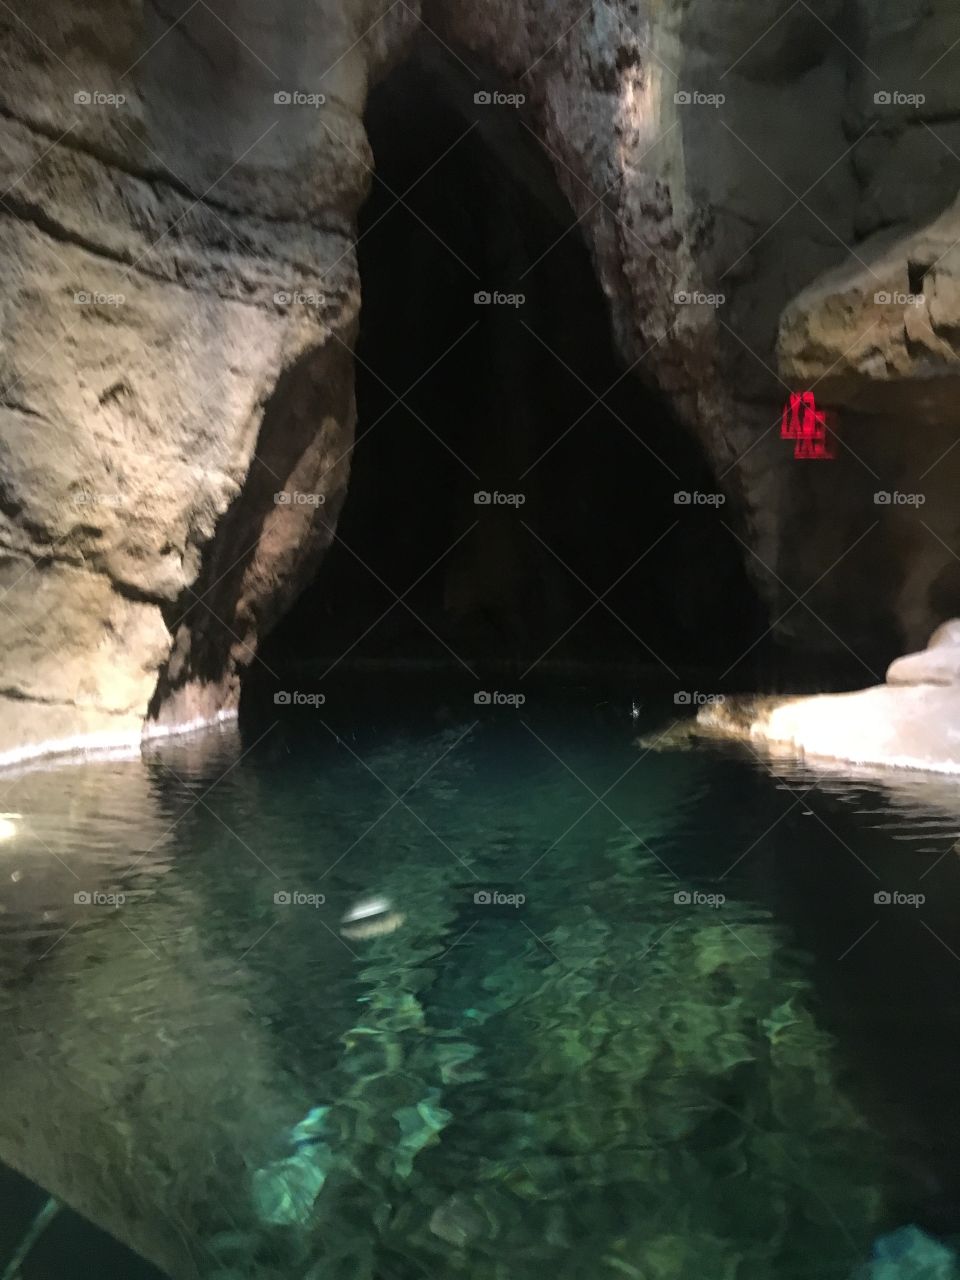 Cave, No Person, Water, Subway System, Travel